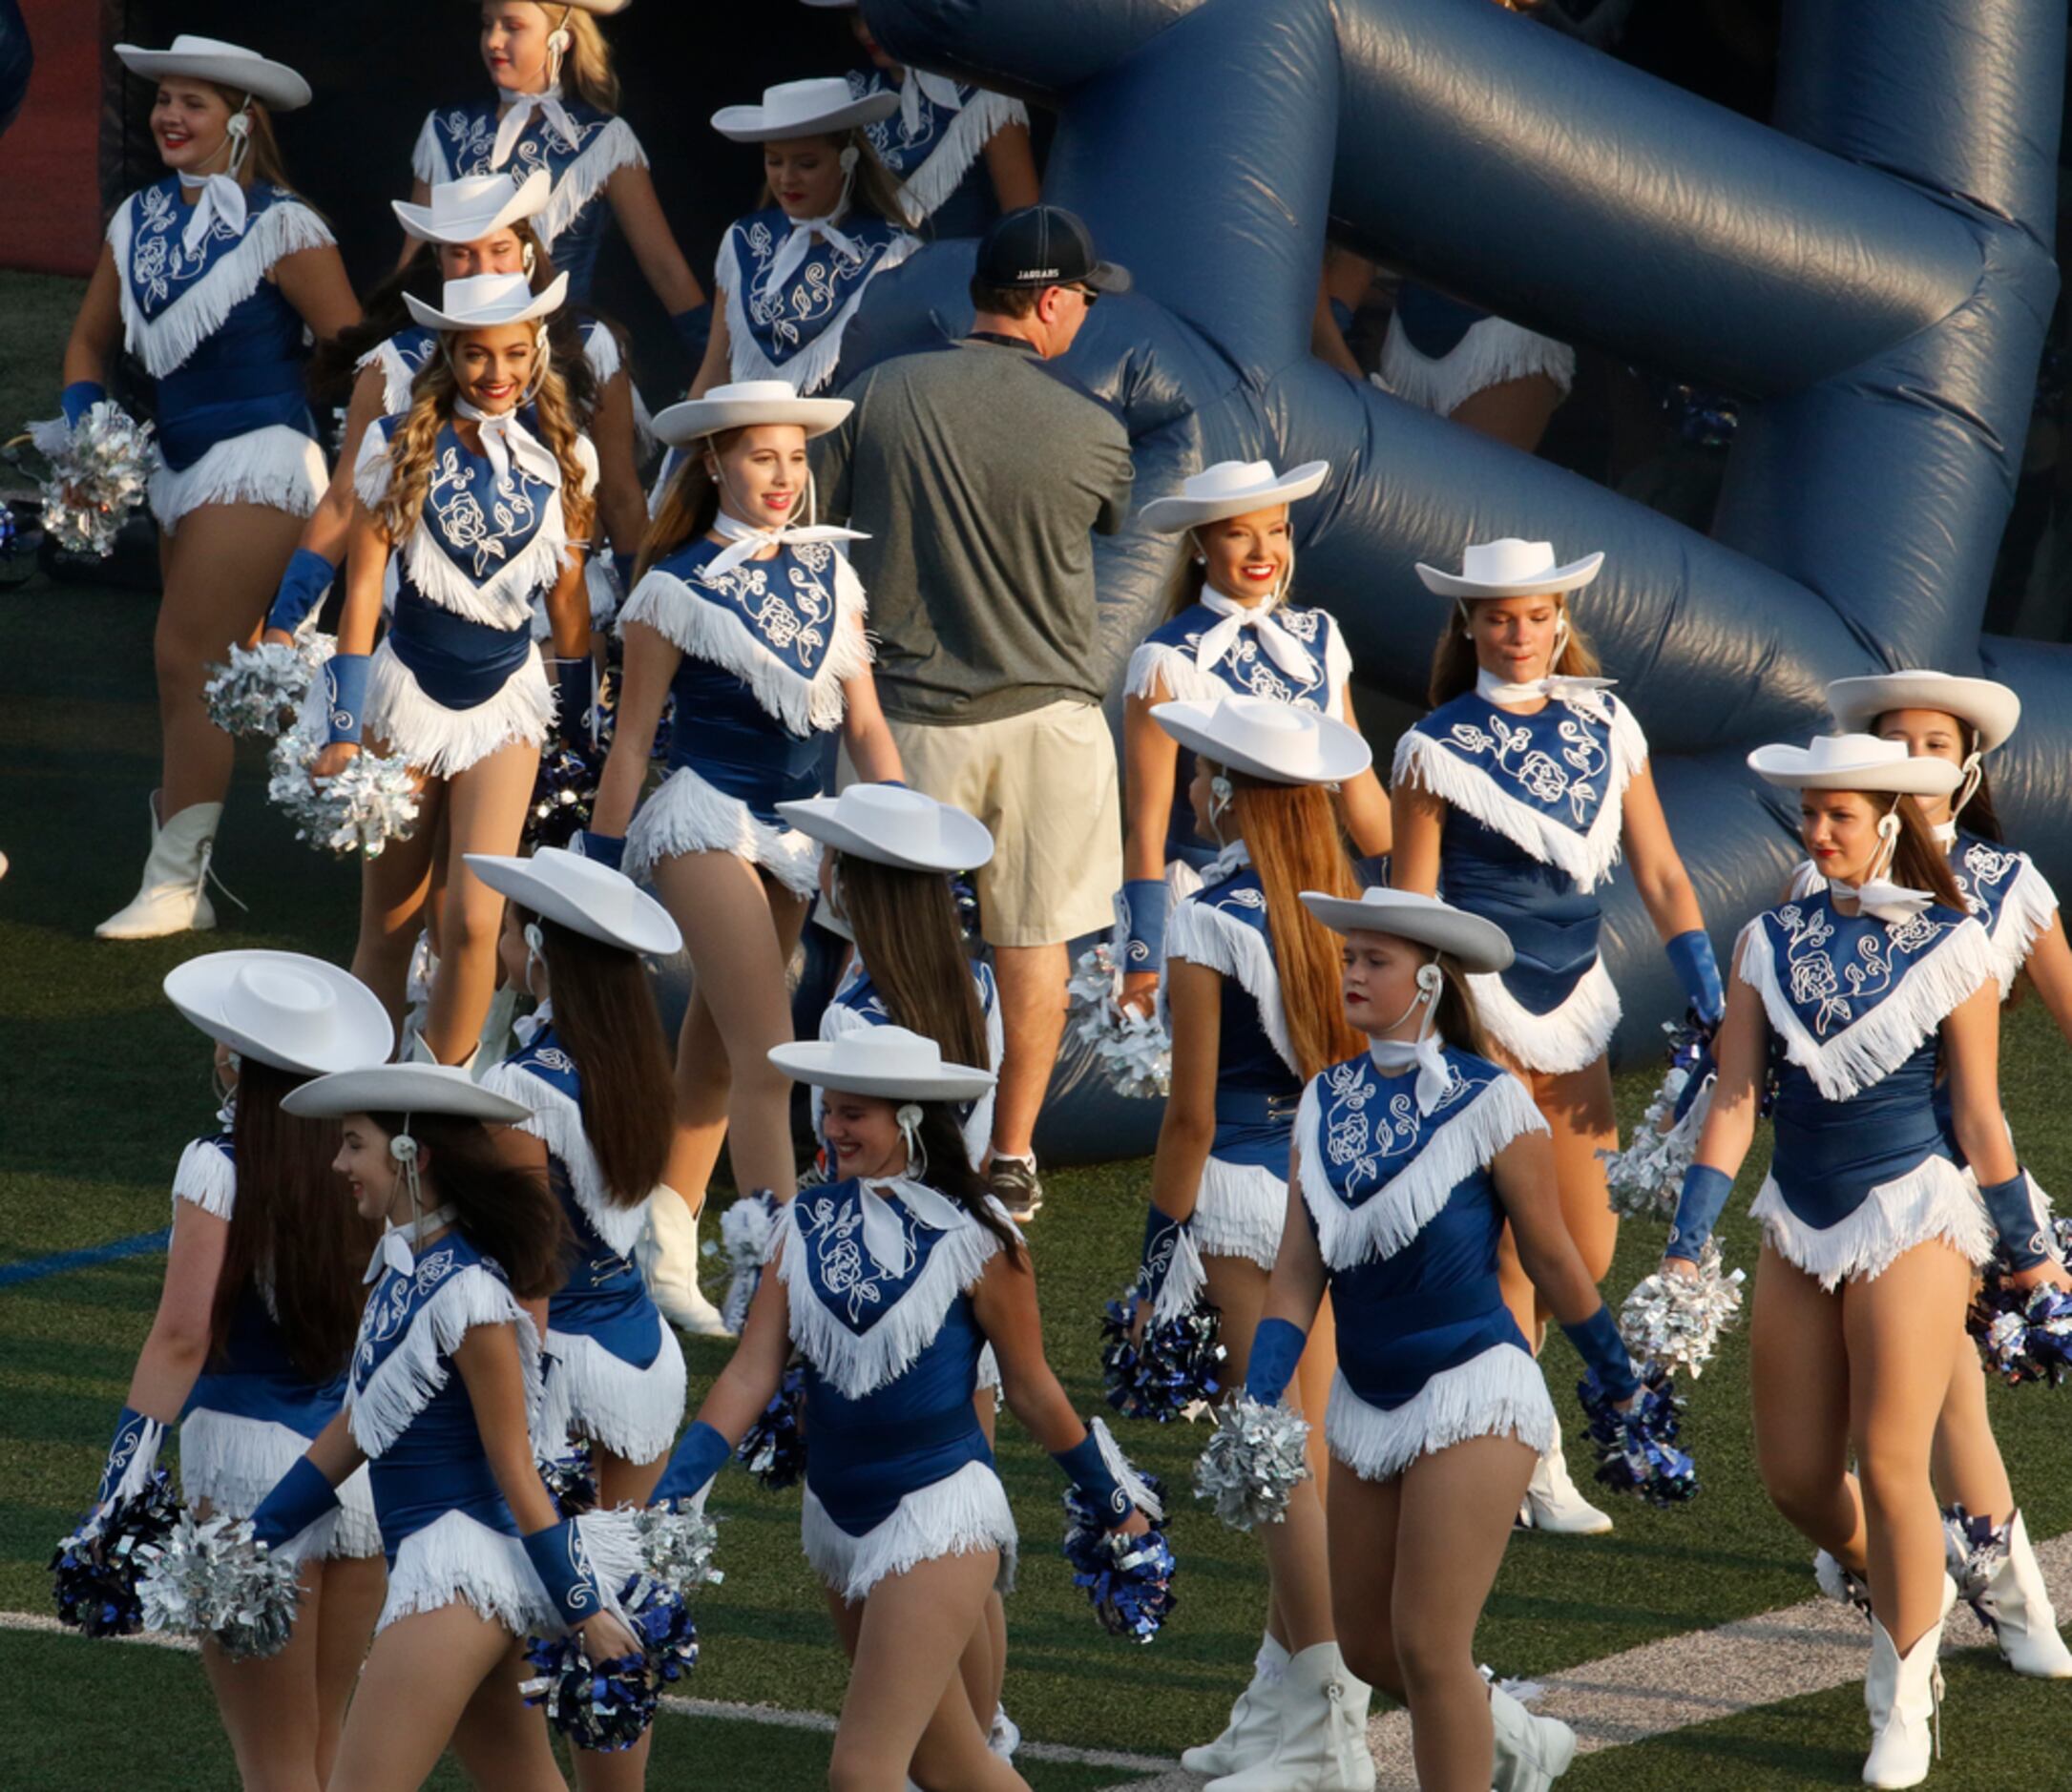 Members of the Flower Mound drill team emerge onto the field through an inflatable helmet...